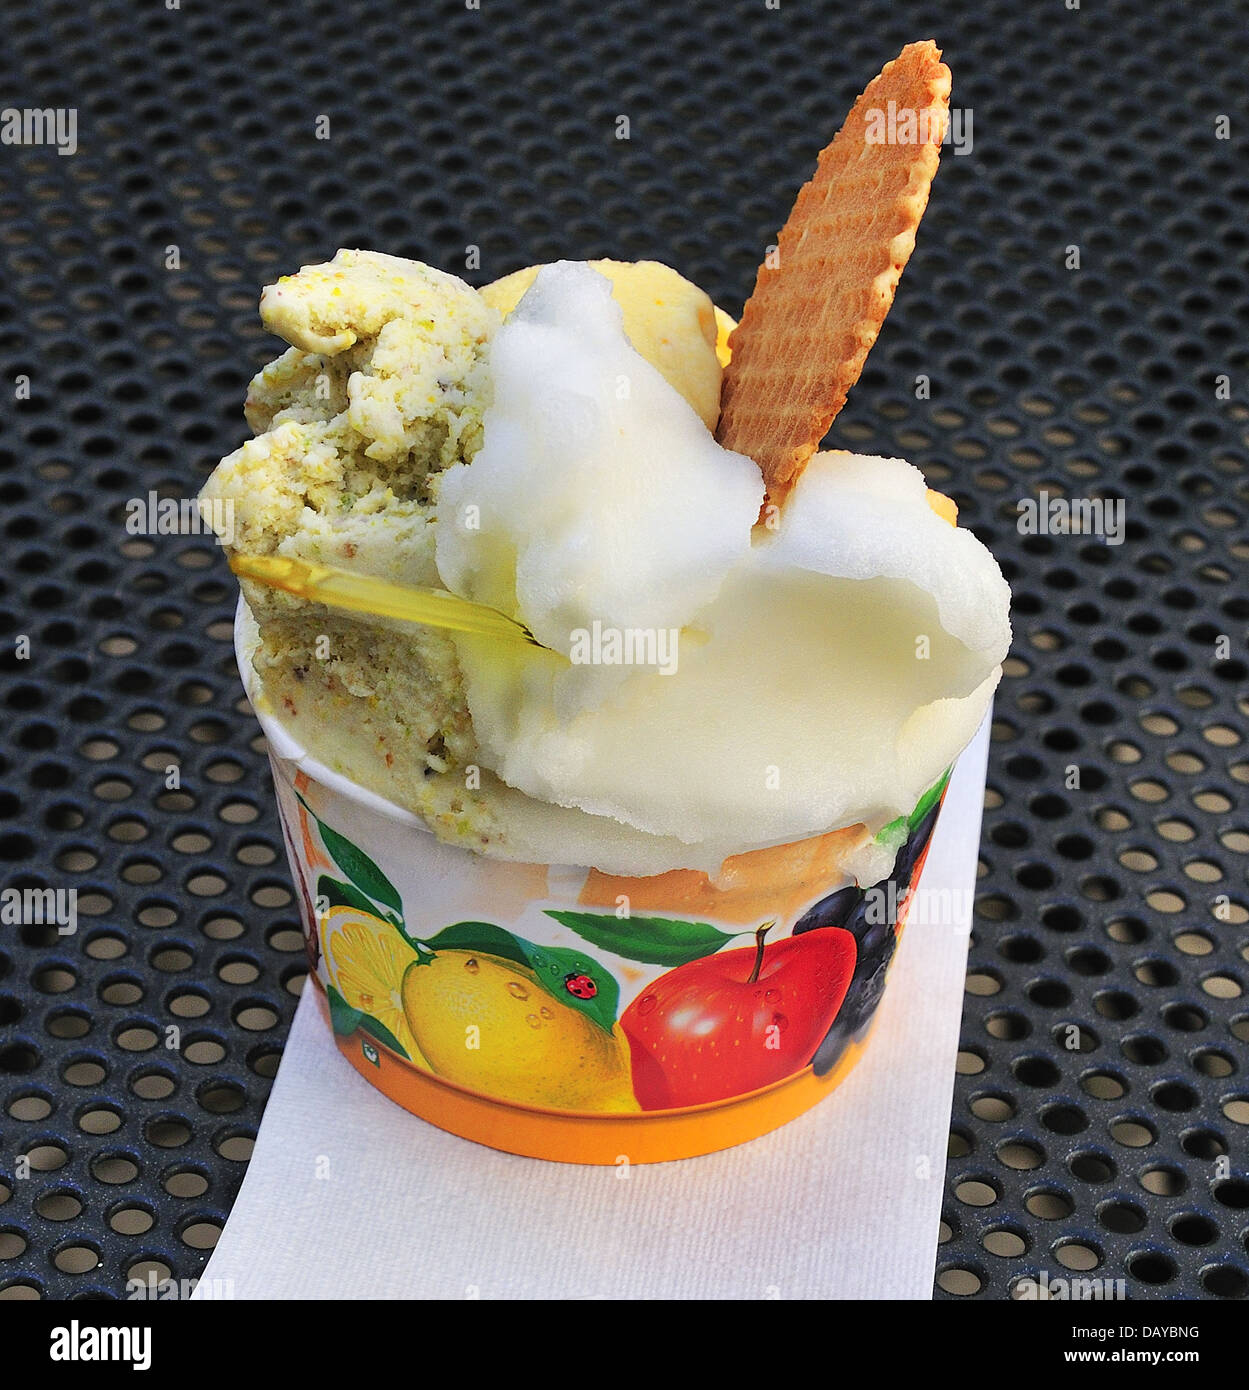 Gelato and sorbet with wafer in tub on a table bought from an Ice cream parlor Otranto, Southern Italy Stock Photo